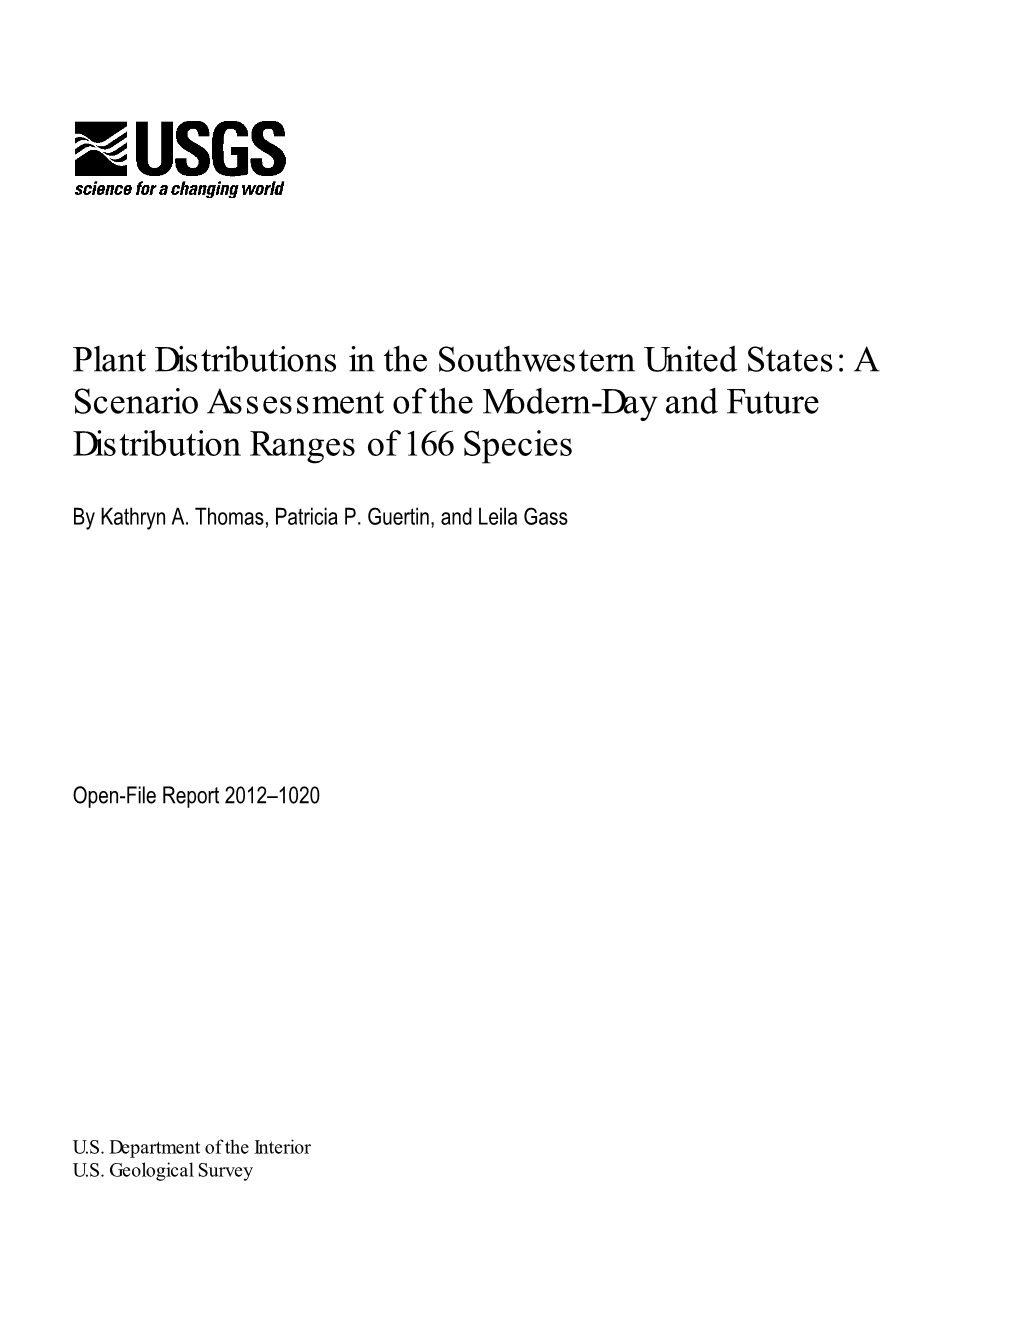 Plant Distributions in the Southwestern United States: a Scenario Assessment of the Modern-Day and Future Distribution Ranges of 166 Species